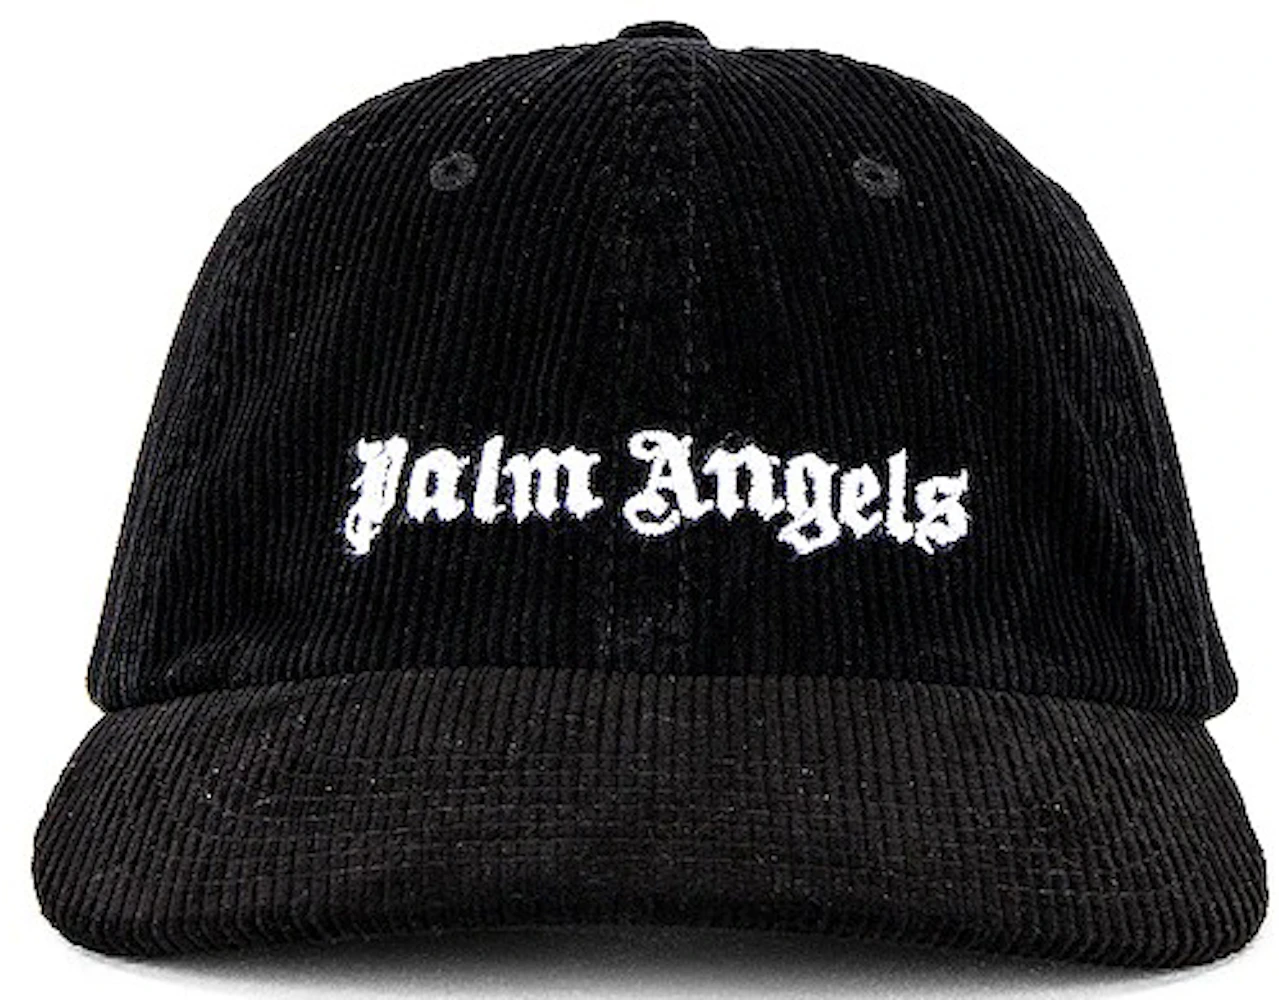 Palm Angels Corduroy Embroidered Logo Cap Black - SS21 - US